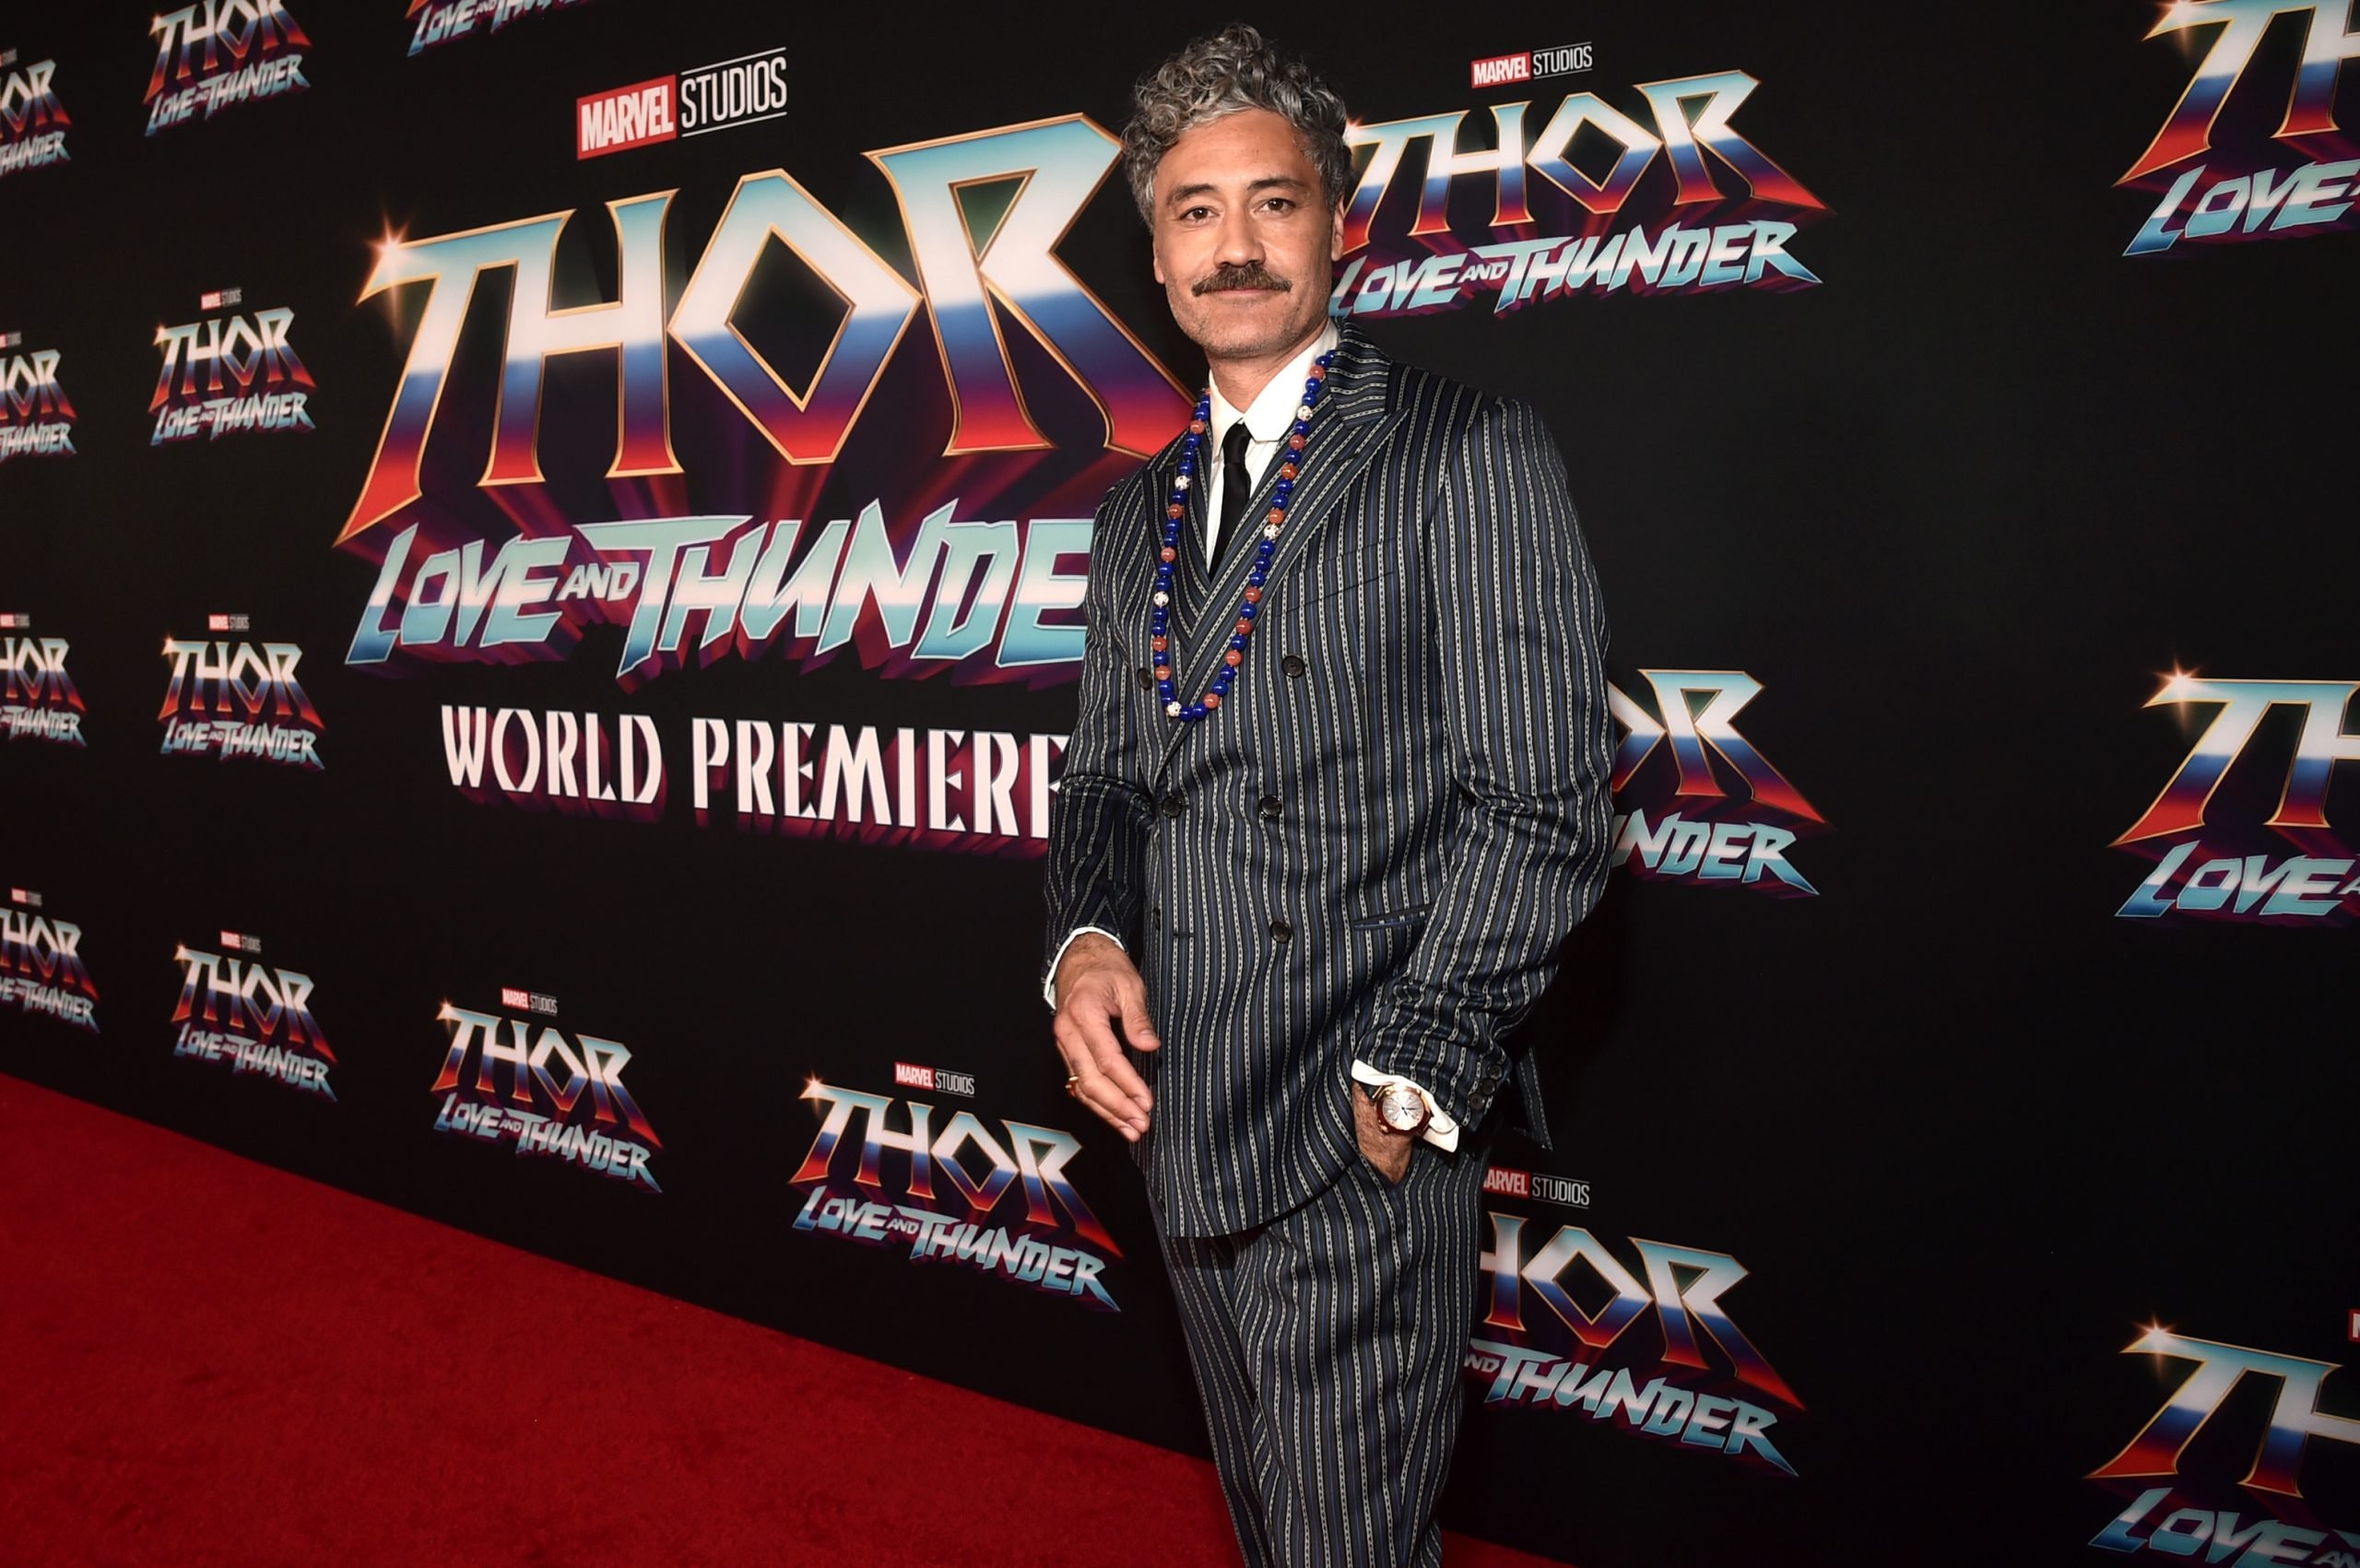 Star Wars director Taika Waititi attends the Los Angeles premiere of Thor: Love and Thunder